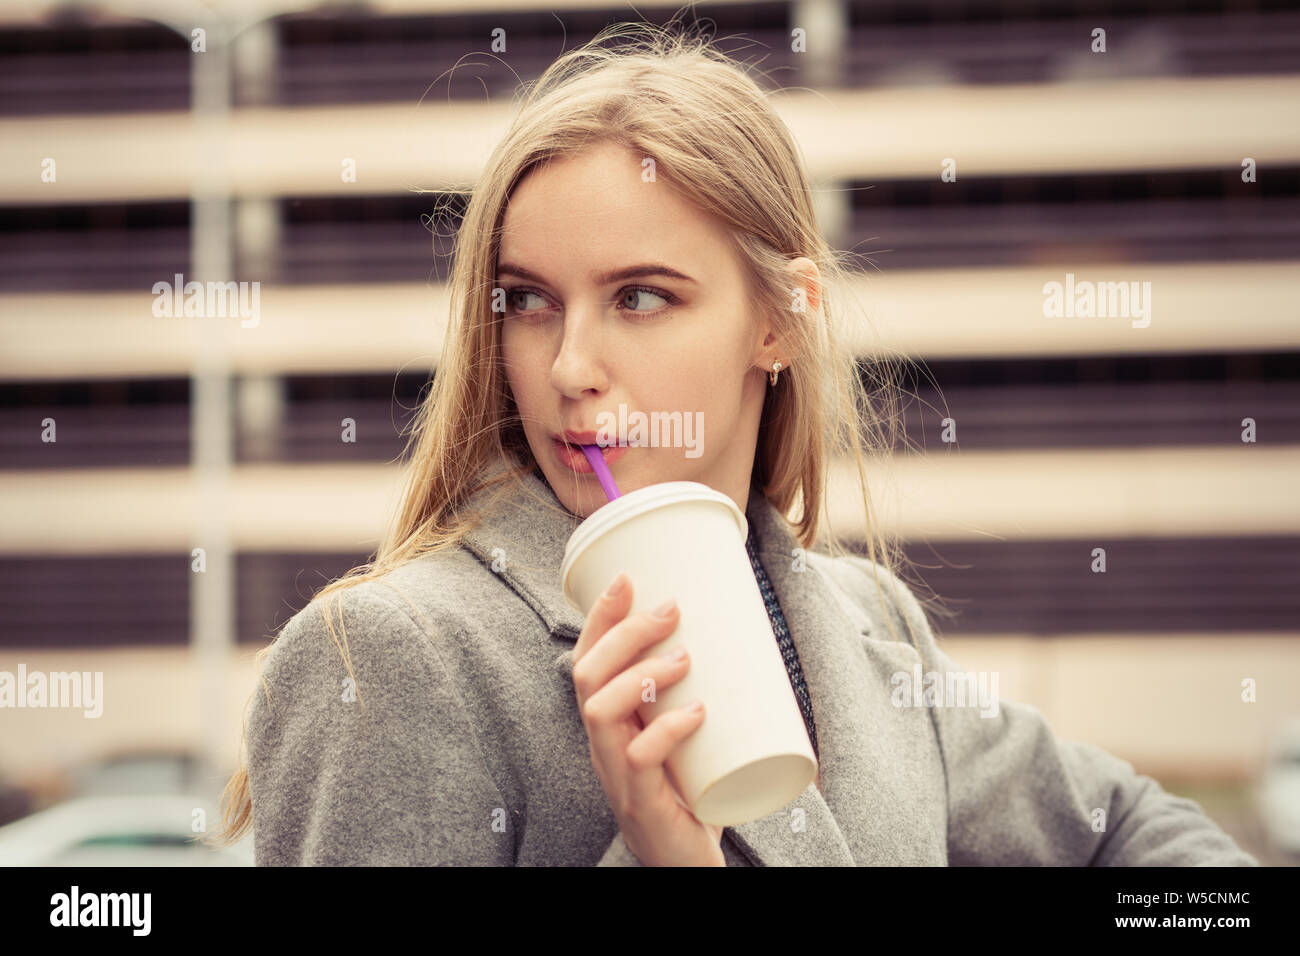 serious blond young woman in street cafe drinks cocktail looking aside Stock Photo